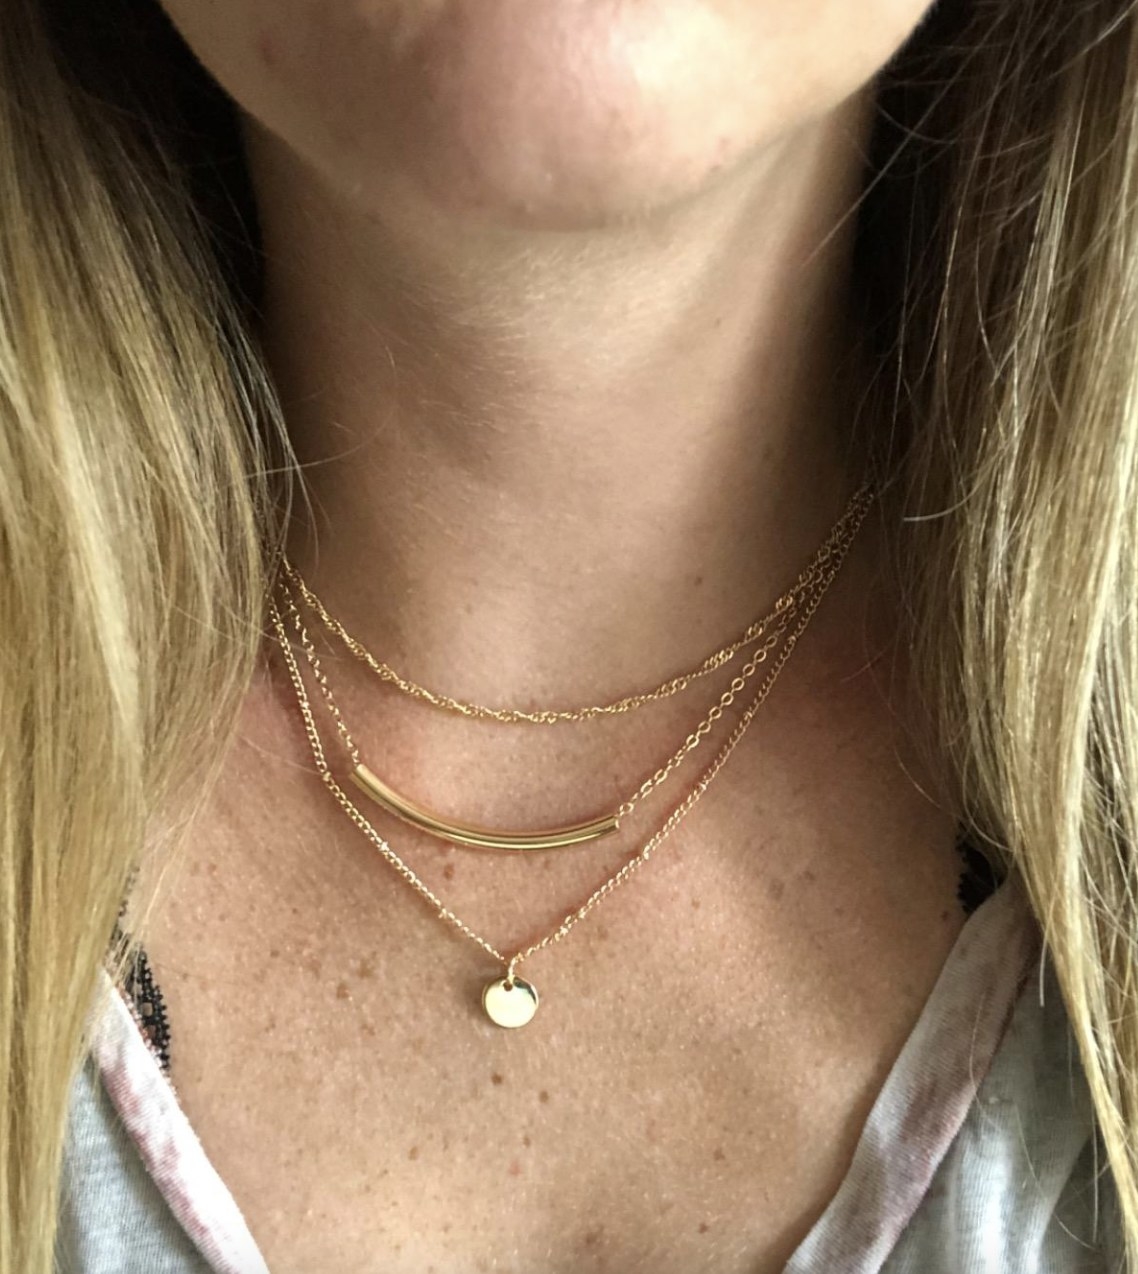 reviewer wearing the layered necklace